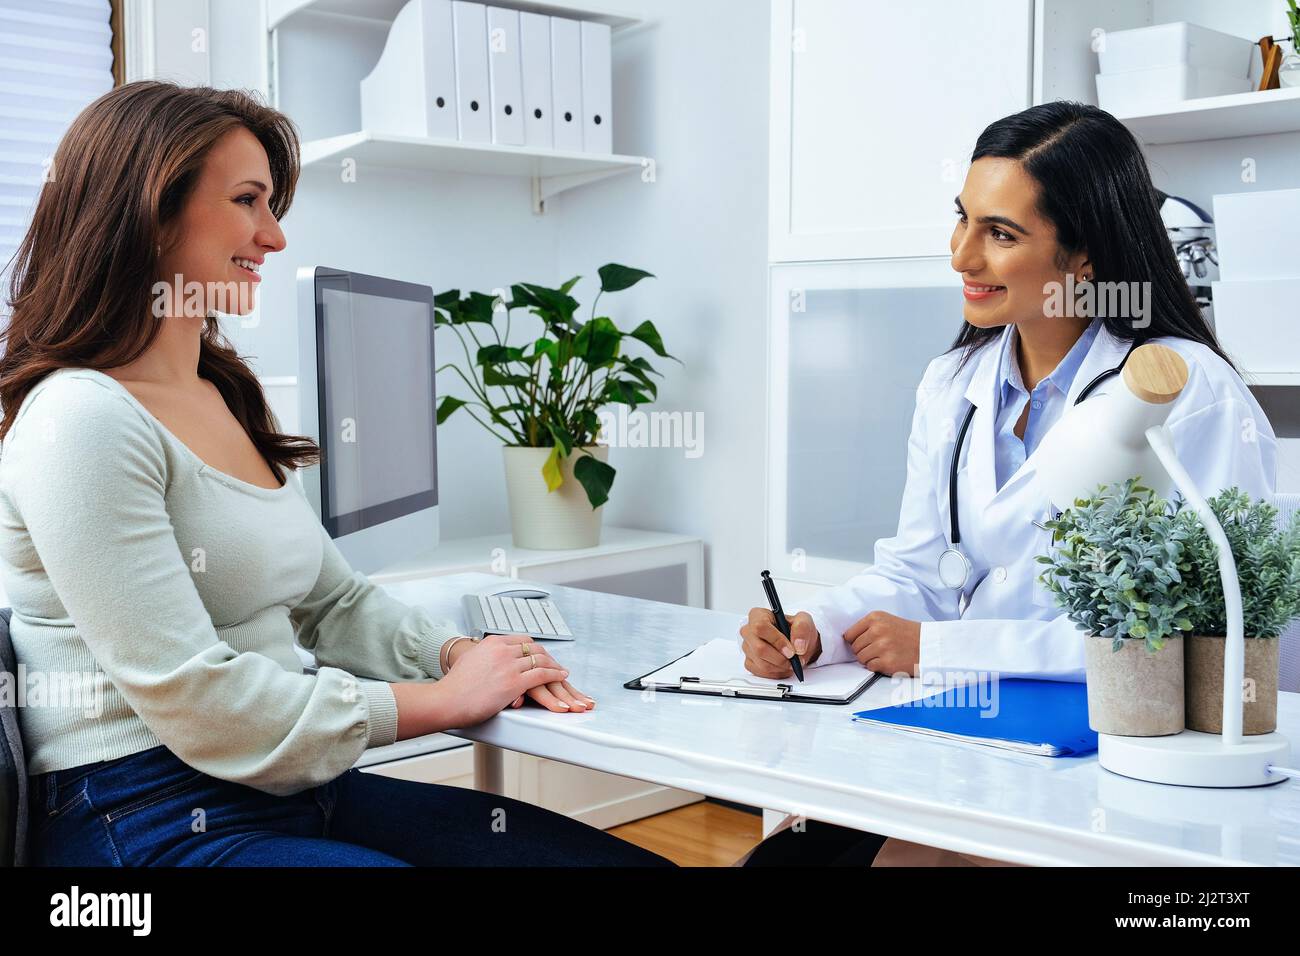 Young lady client patient visiting pleasant attentive female doctor physician at modern clinic medical center healthcare industry Stock Photo